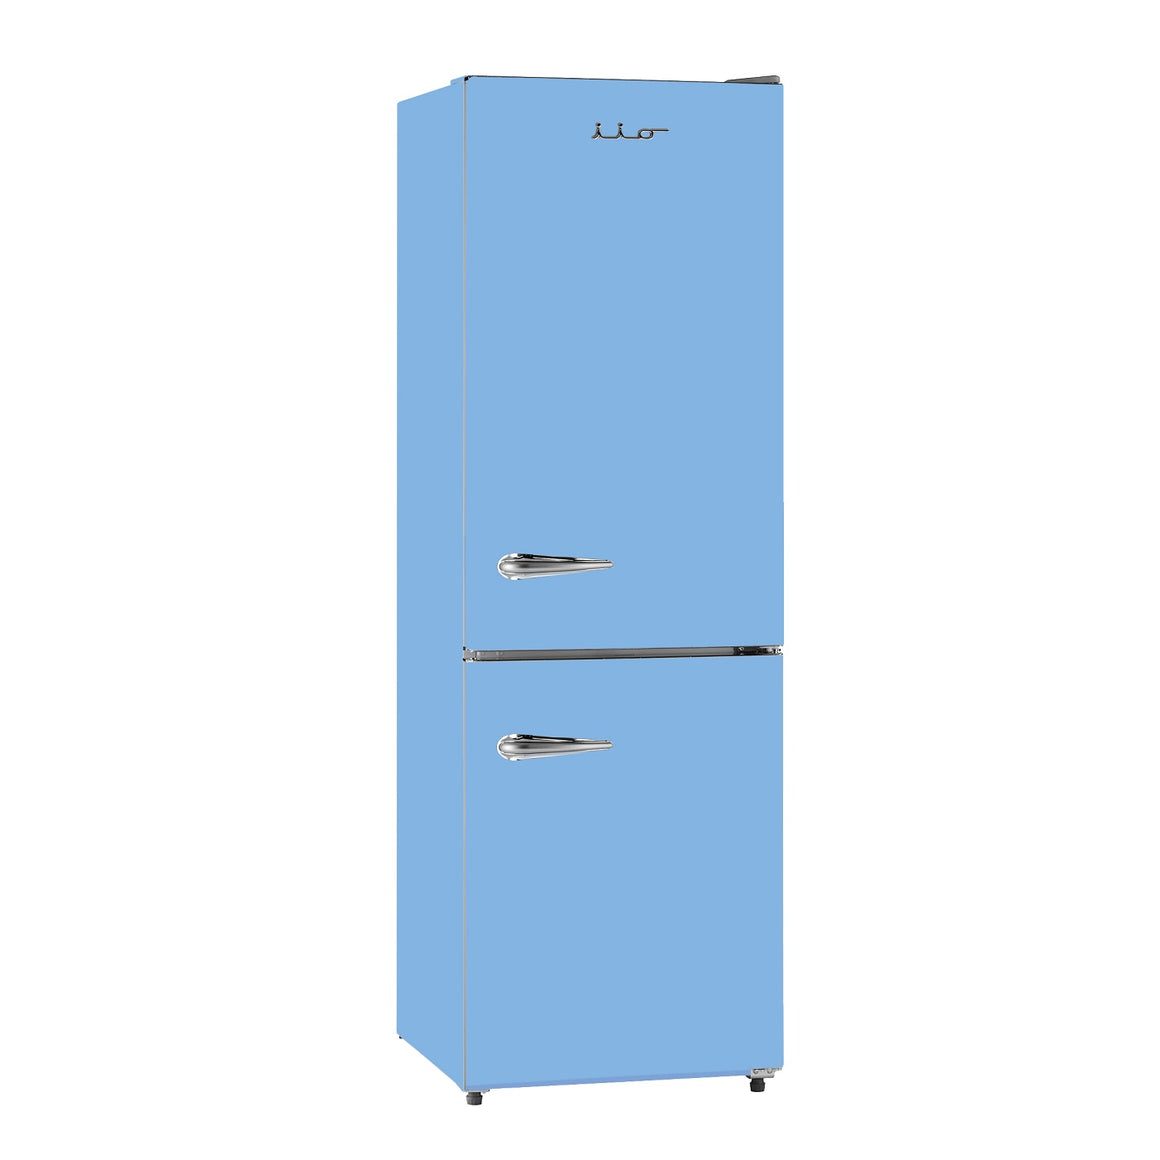 iio 11 cu. ft. Frost Free Retro Refrigerator with Bottom Freezer in Light Blue (Right Hinge)